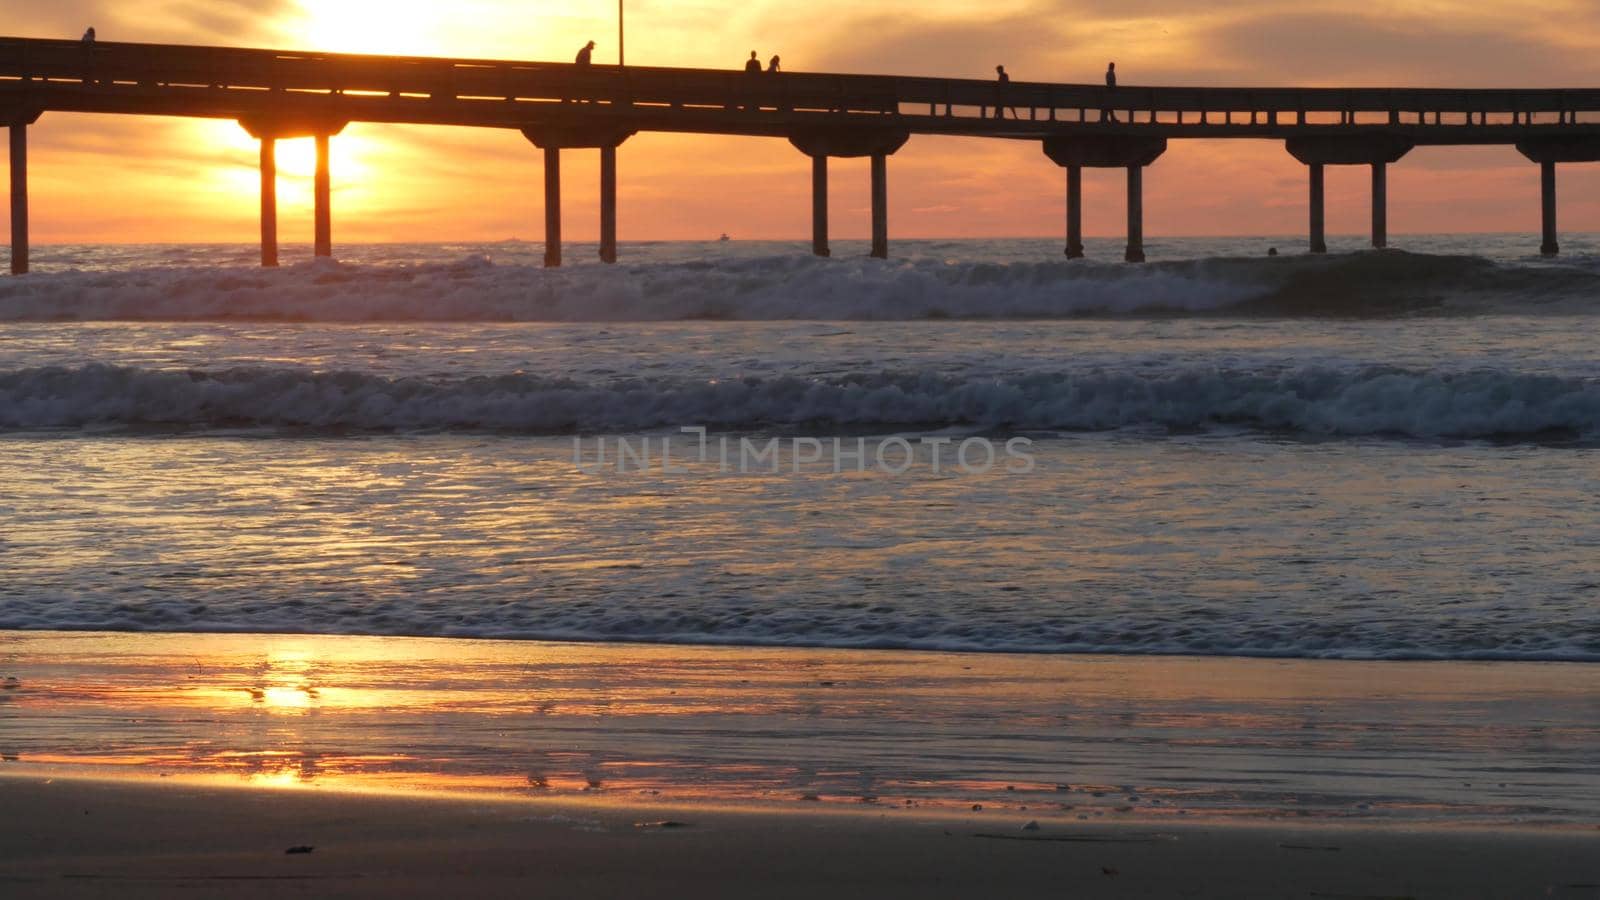 Silhouette of people walking, pier on piles in sea water. Ocean waves, dramatic sky at sunset. California coast aesthetic, beach or shore vibe at sundown. Summer seascape in San Diego near Los Angeles